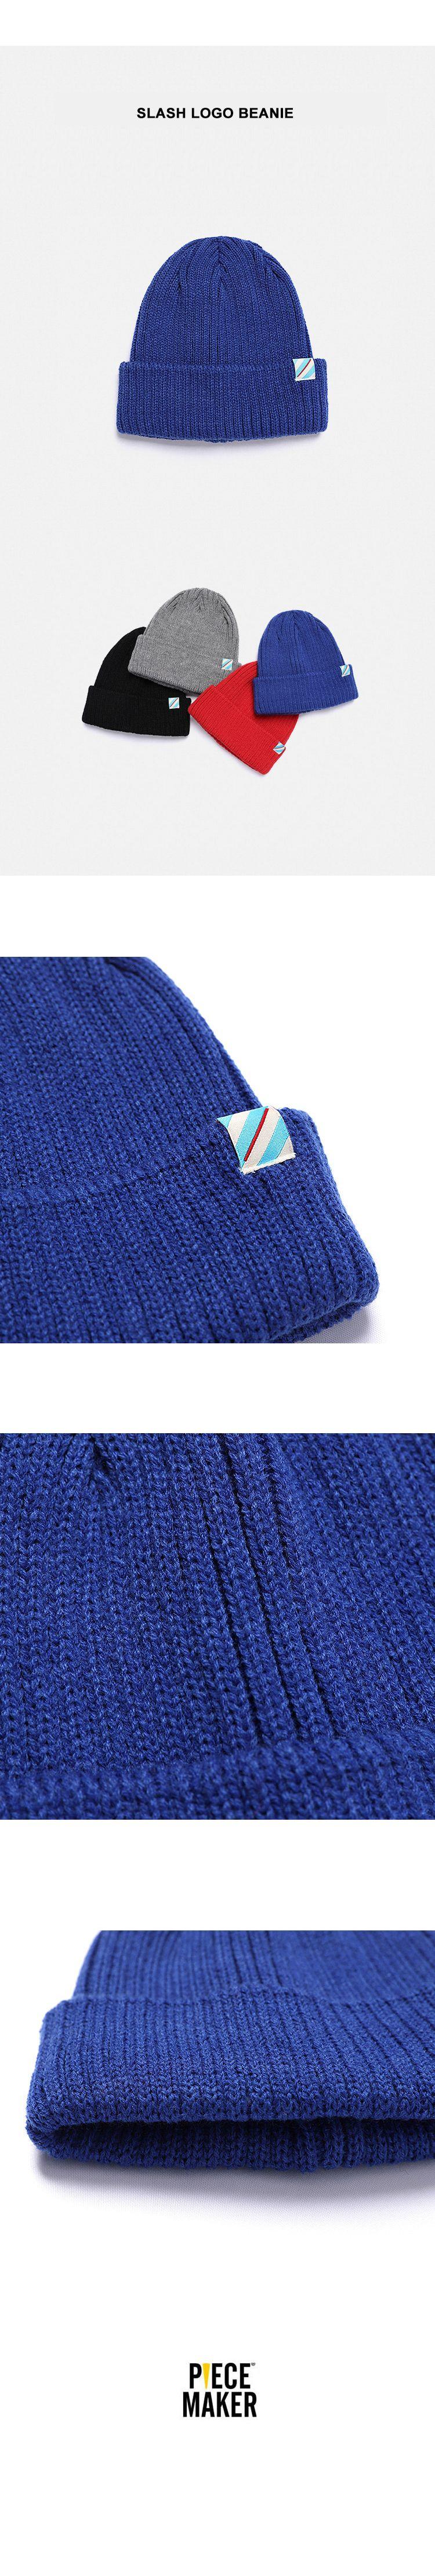 Blue Slash Logo - PIECEMAKER Slash Logo Beanie In Blue │Curated Collections of Global ...